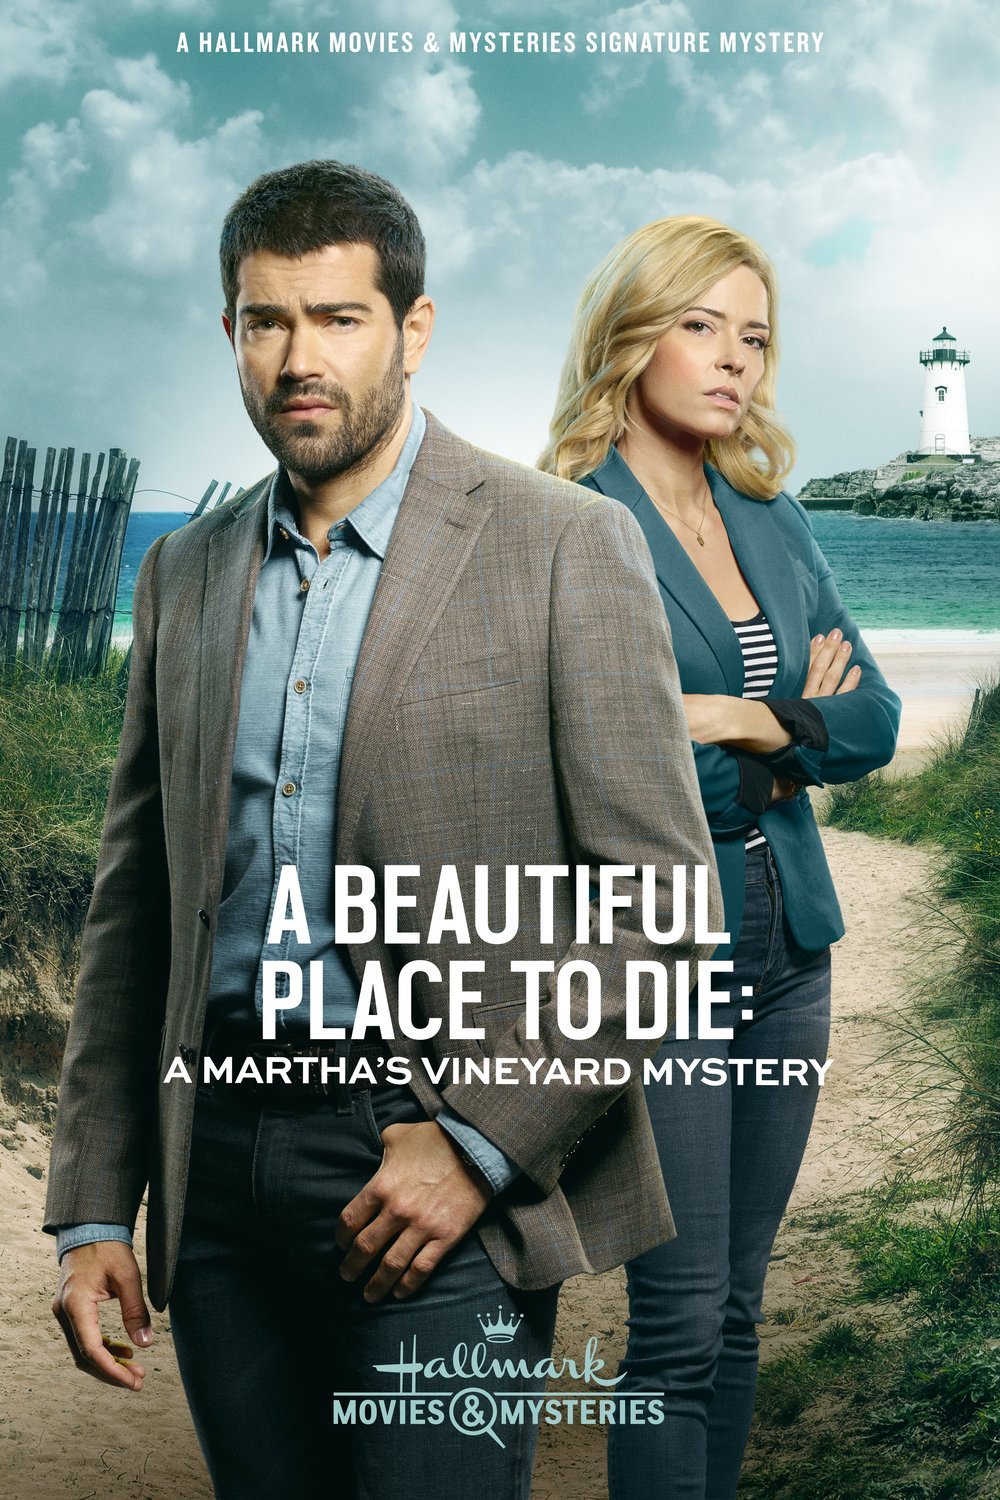 L'affiche du film A Beautiful Place to Die: A Martha's Vineyard Mystery